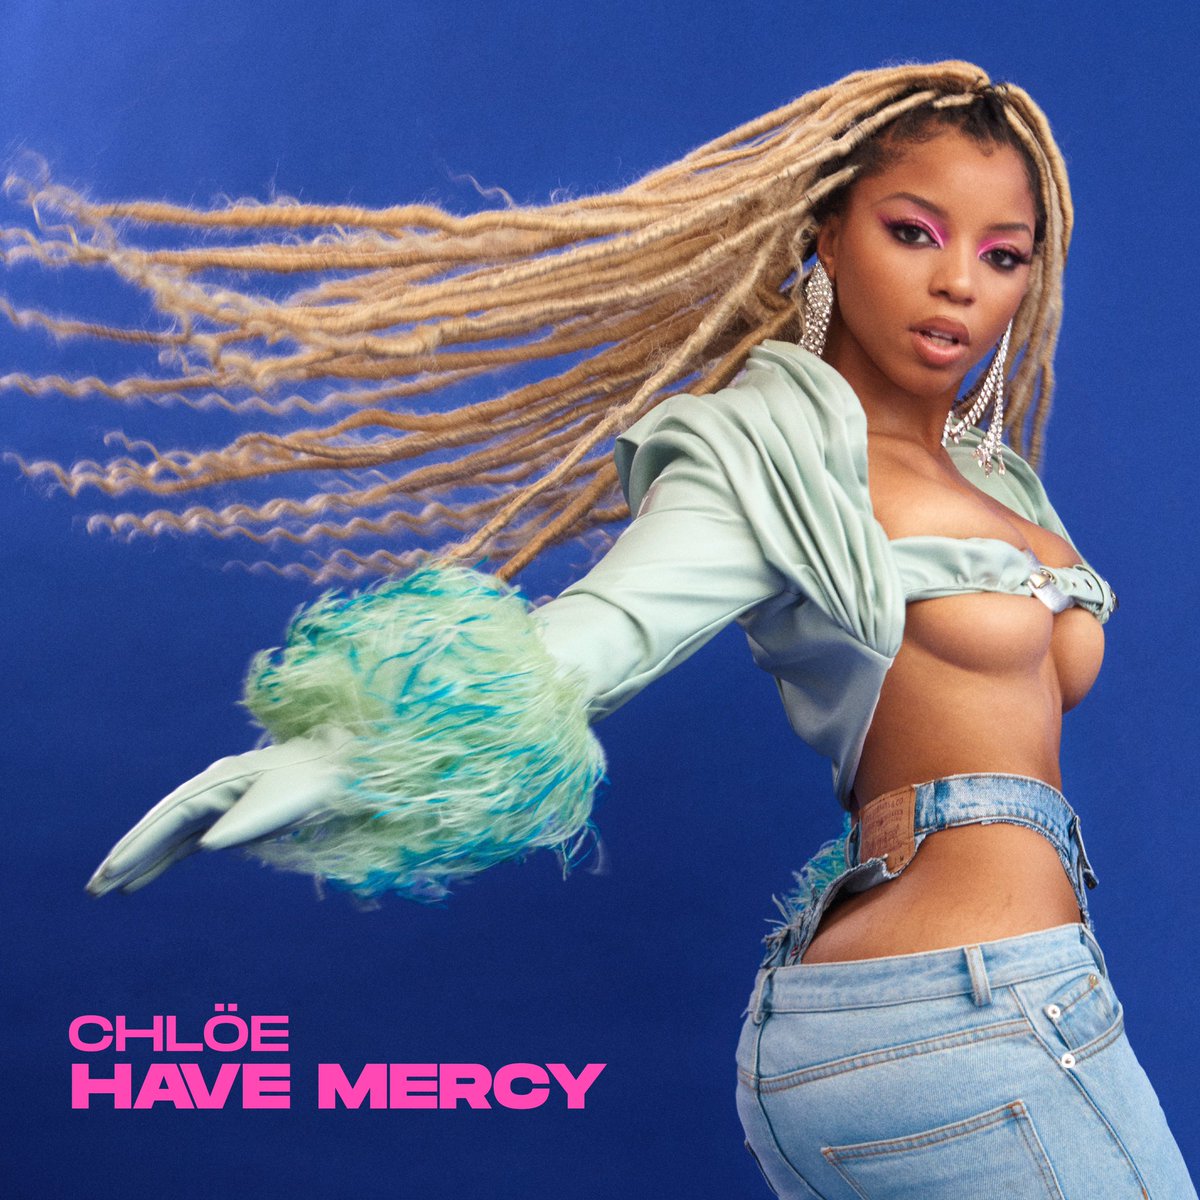 the official cover art!! a few more days til #havemercy 😈 should i drop the trailer for the video? 👀💕